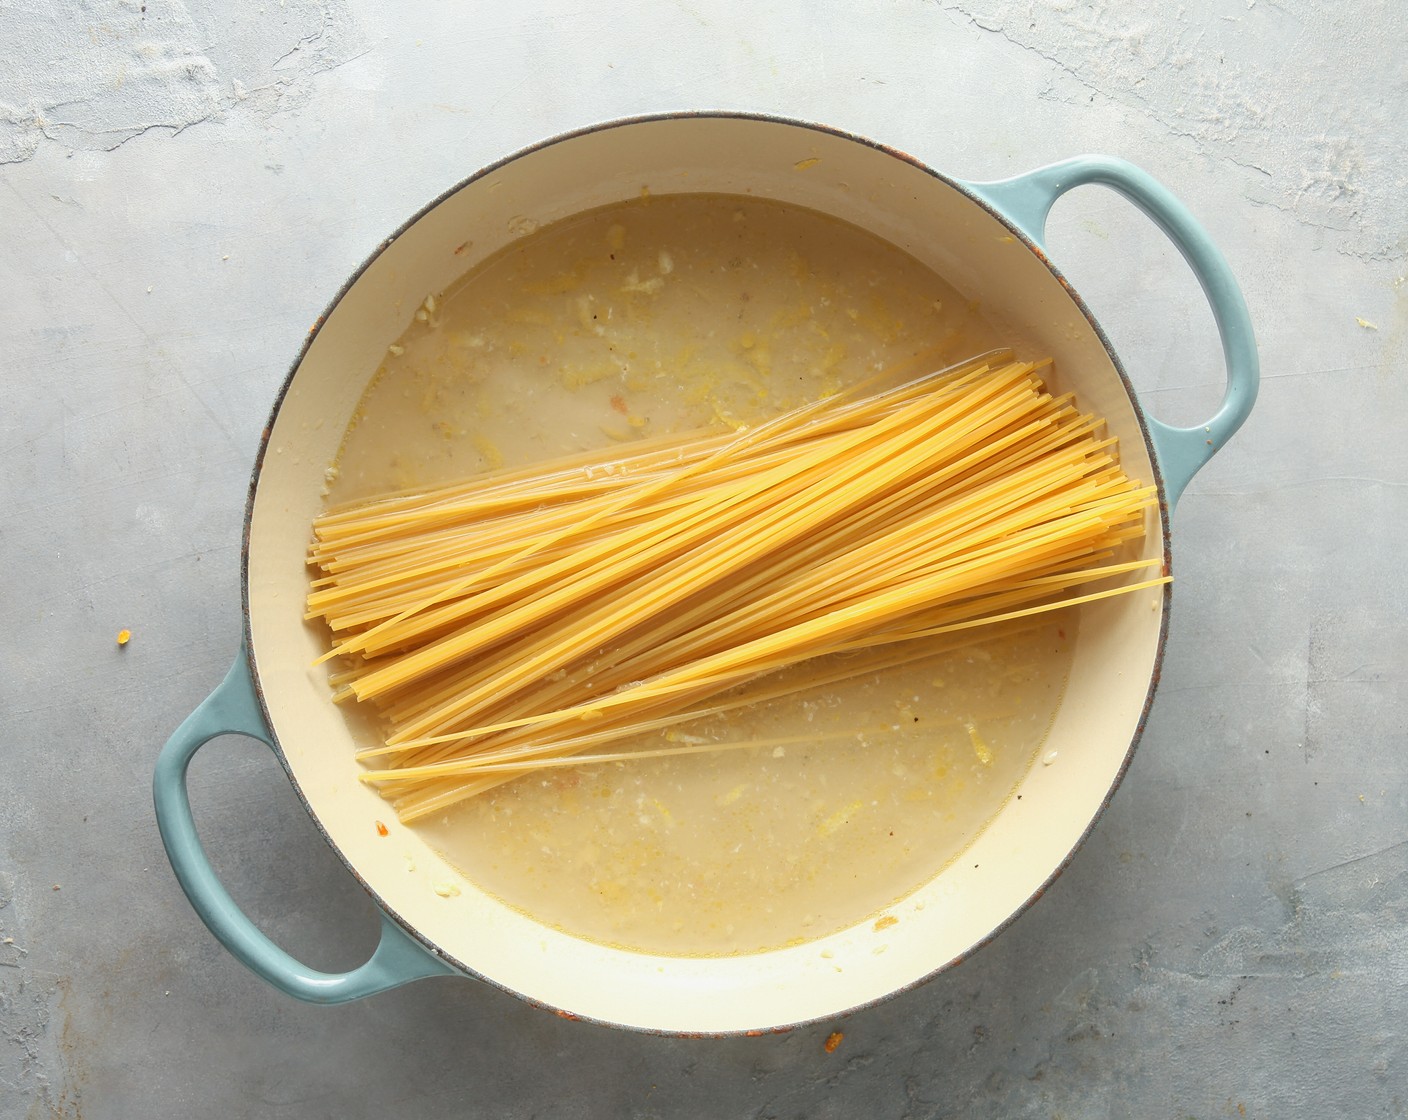 step 2 To the same skillet, add the Water (5 cups), White Wine (1/2 cup), Lemon (1), Salt (1/2 tsp), and Spaghetti (1 box). Simmer uncovered for 9-10 minutes, until the spaghetti is cooked to your liking.